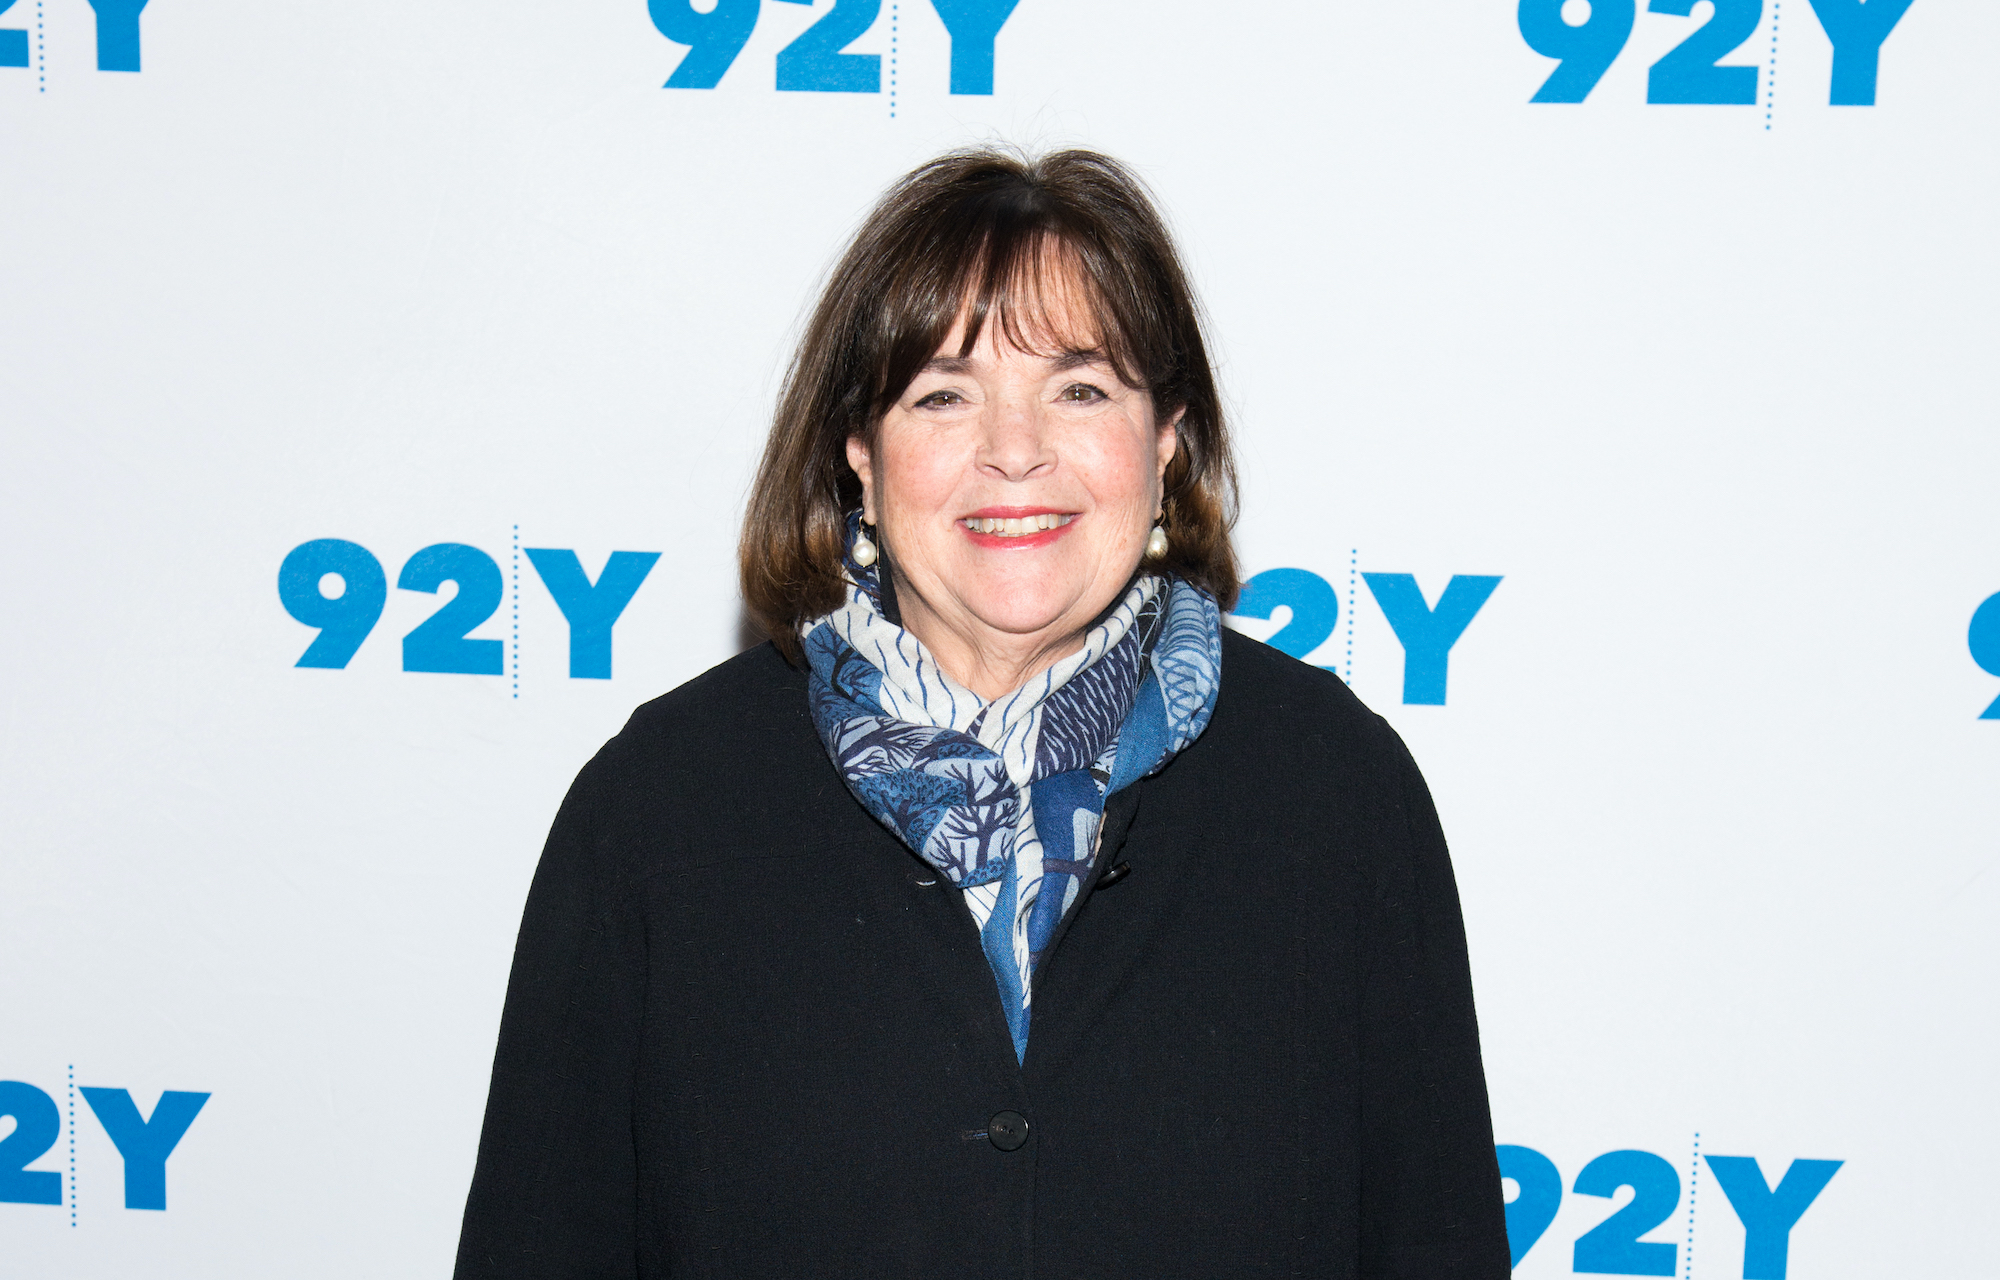 Ina Garten smiling in front of a white background